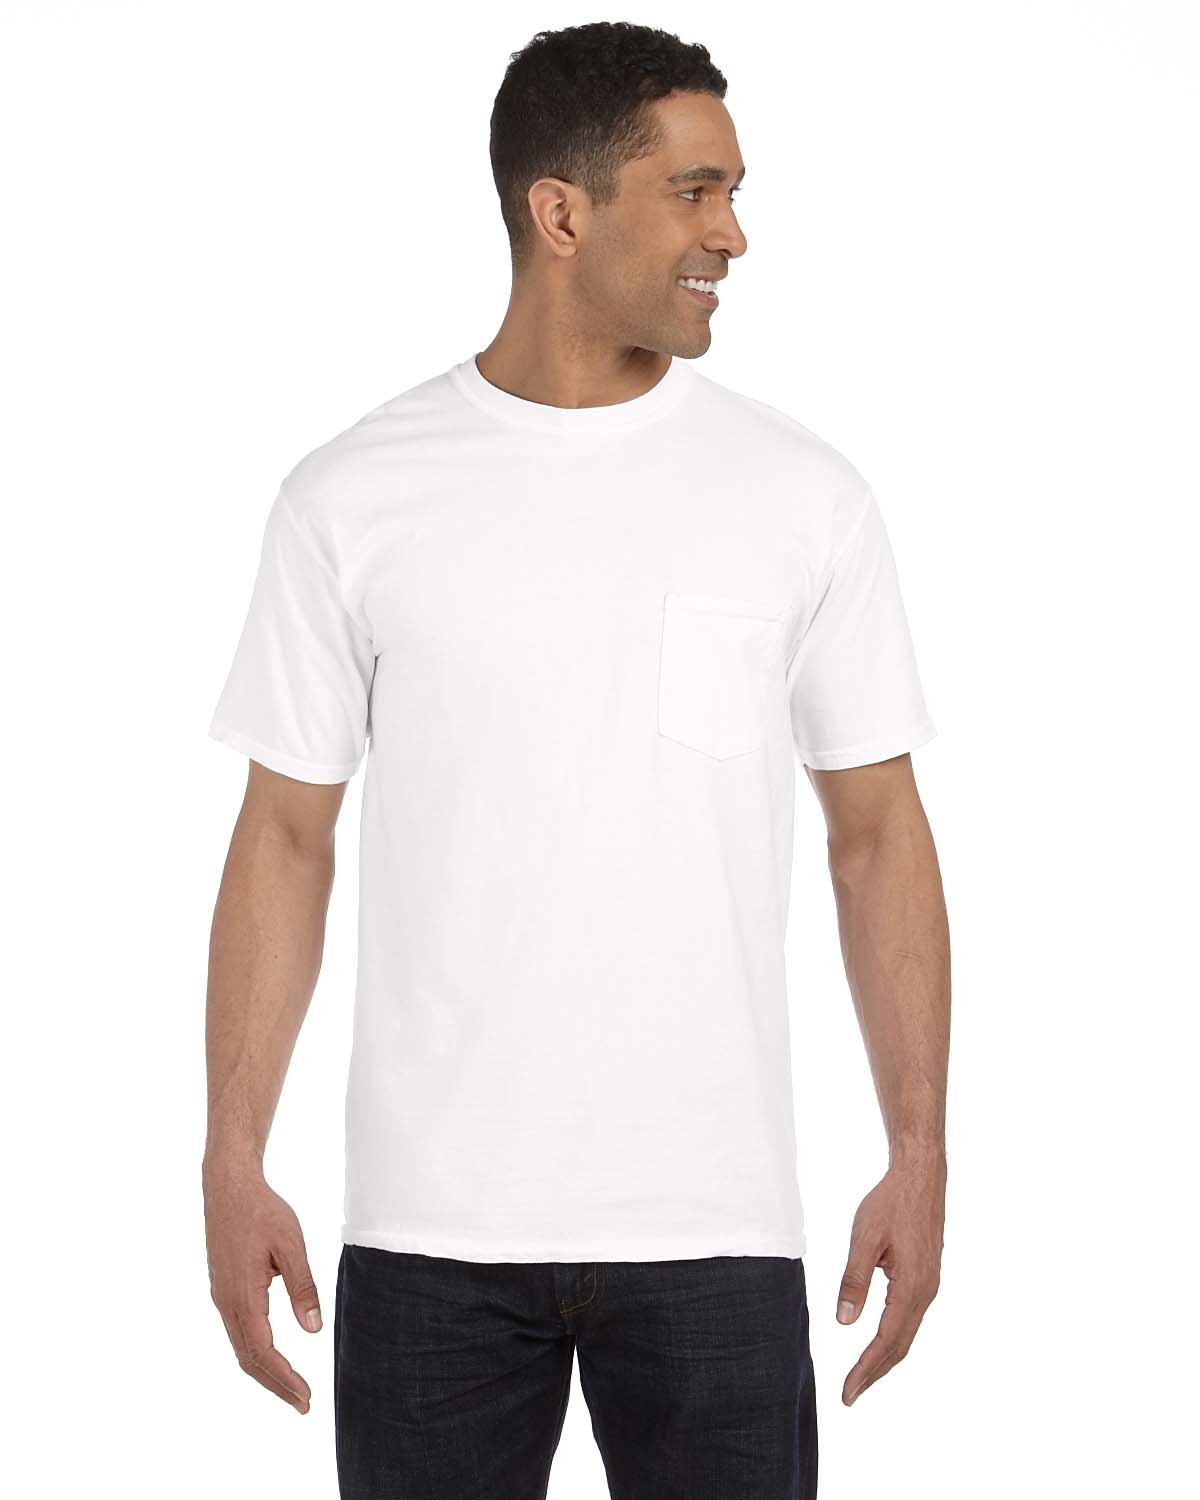 Comfort Colors Adult Heavyweight Pocket T-Shirt WHITE 